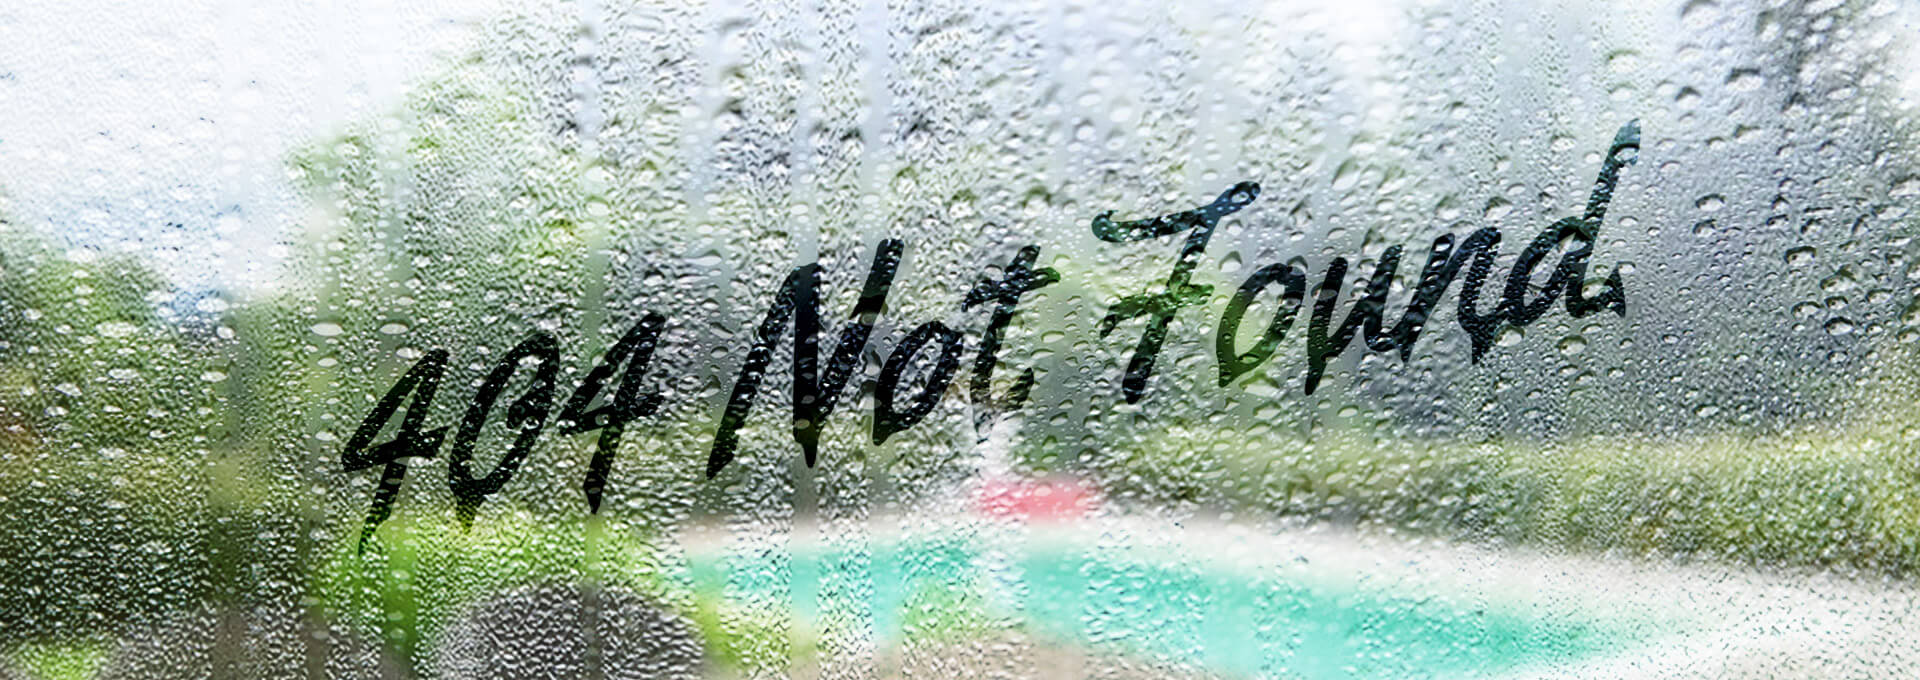 A fogged up rainy window with '404' written on it.